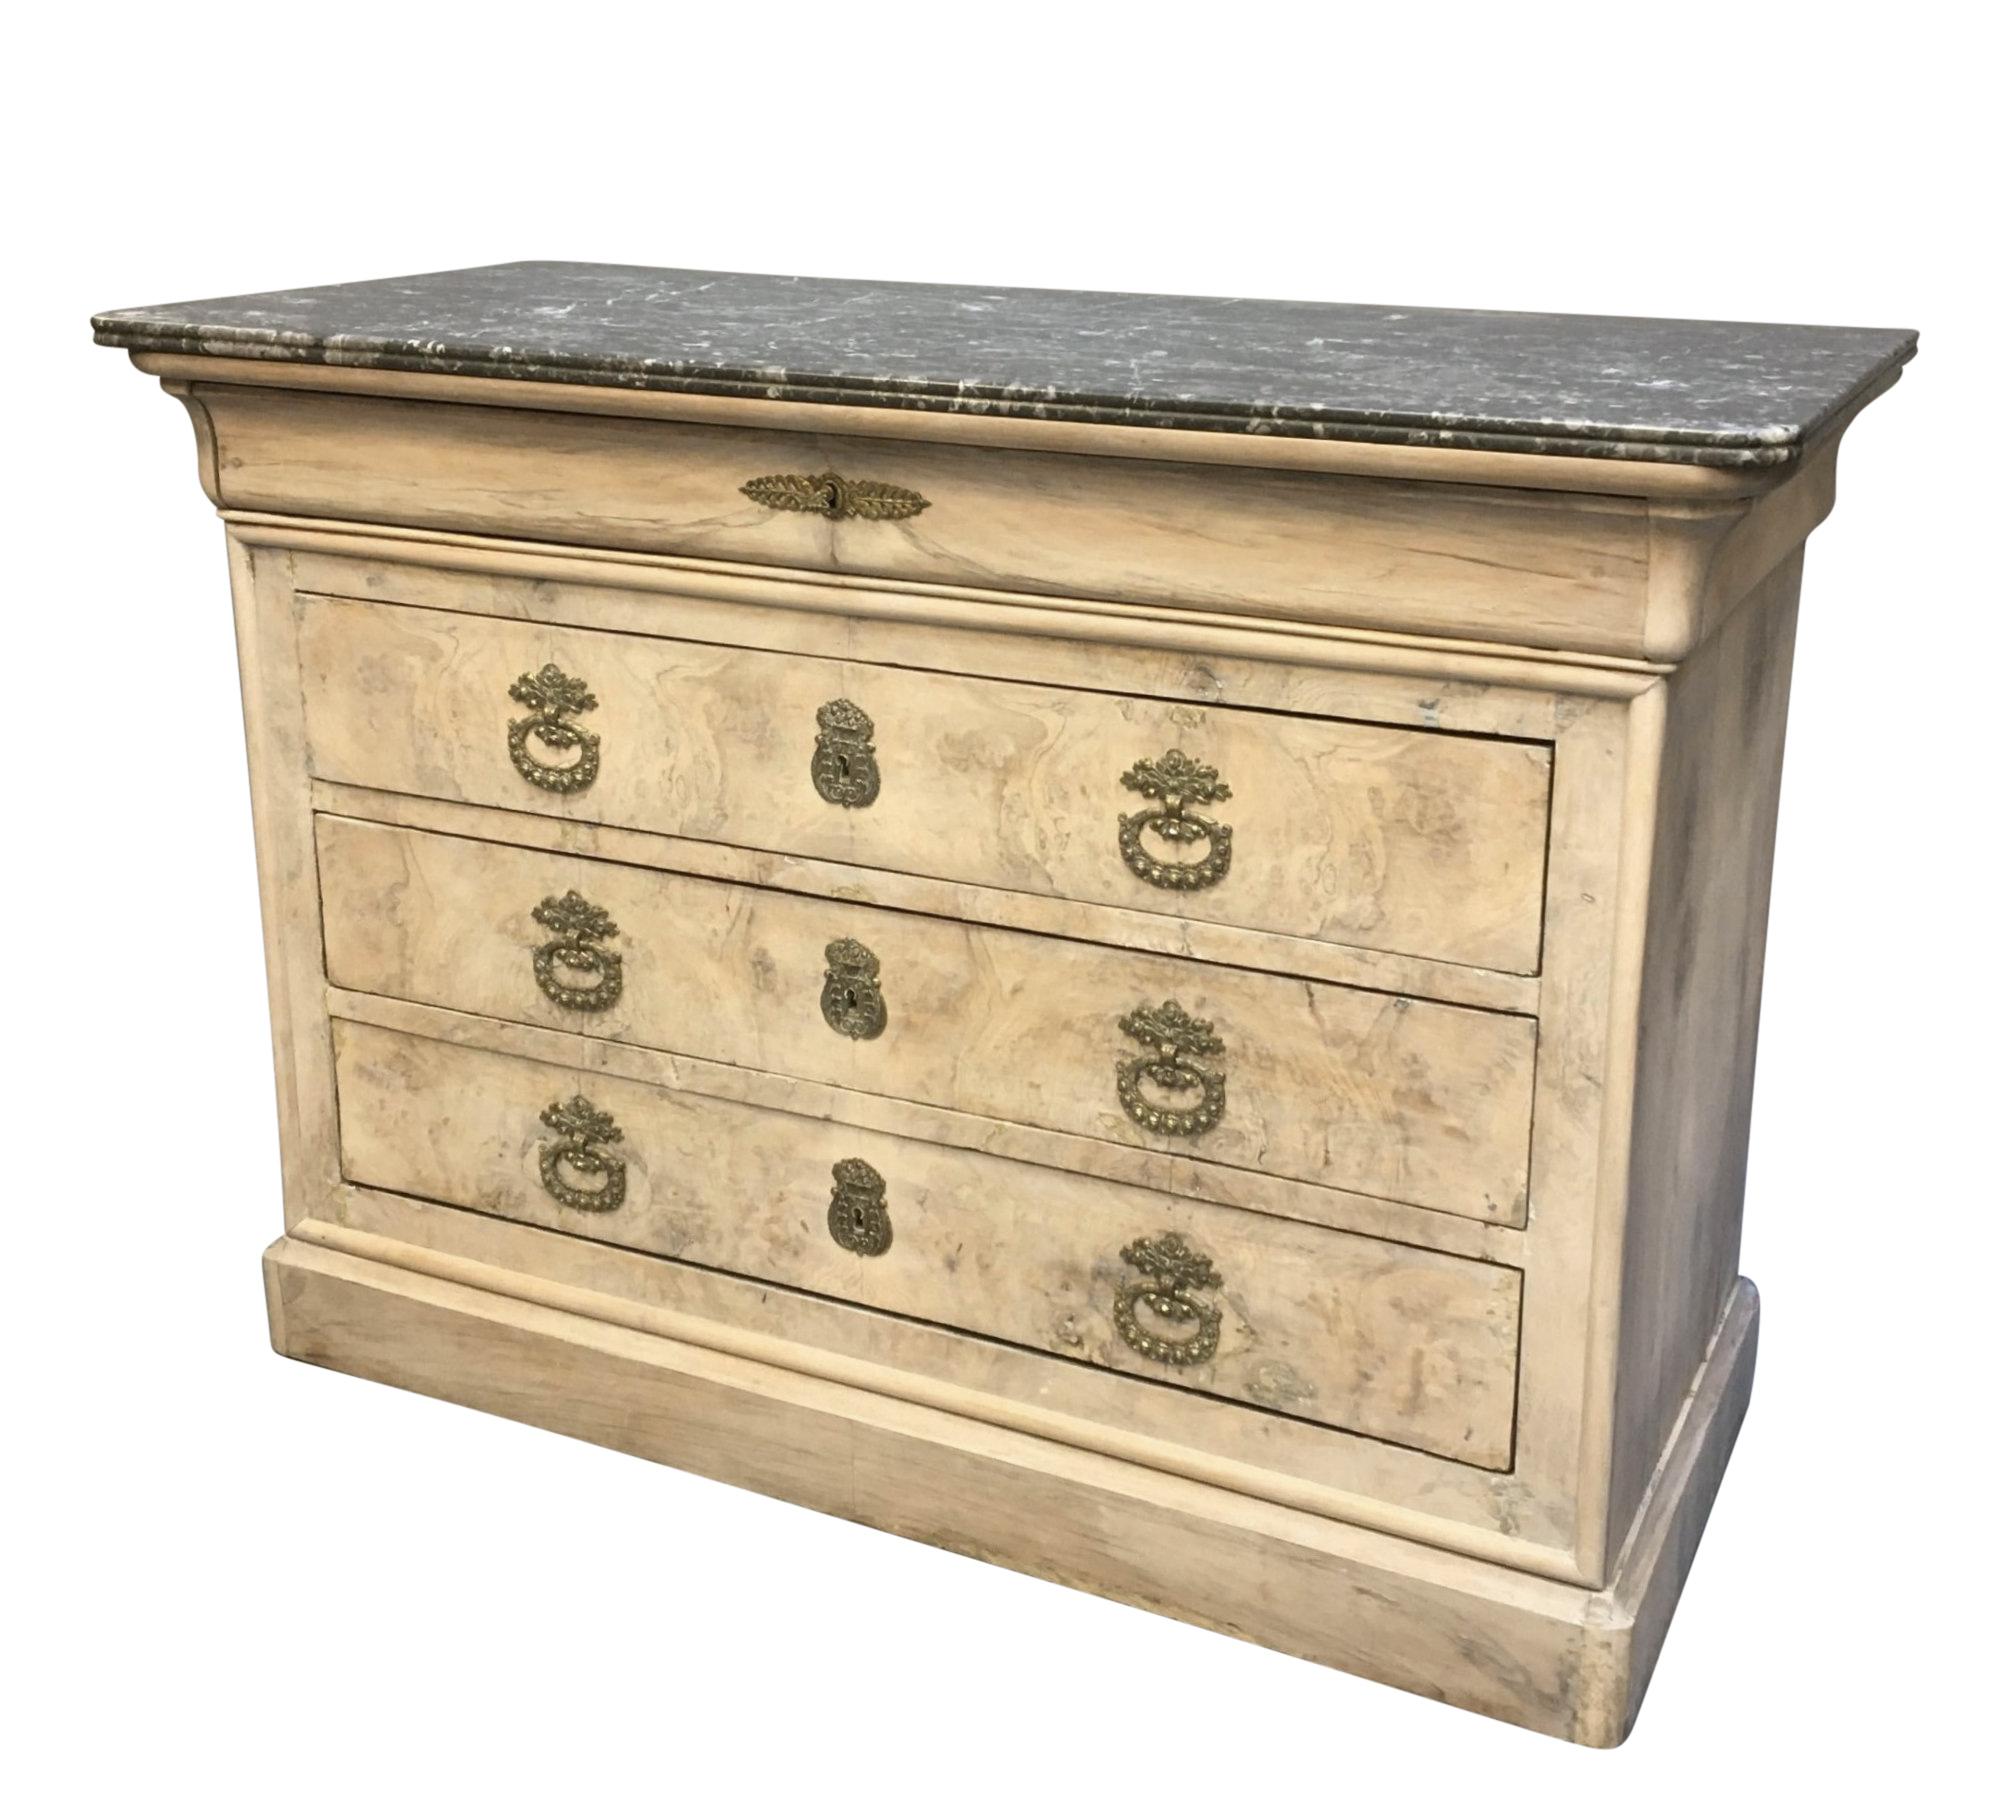 A French Napoleon III, Empire Revival four drawer commode in pickled mahogany. With good bronze handles and variegated grey marble top.